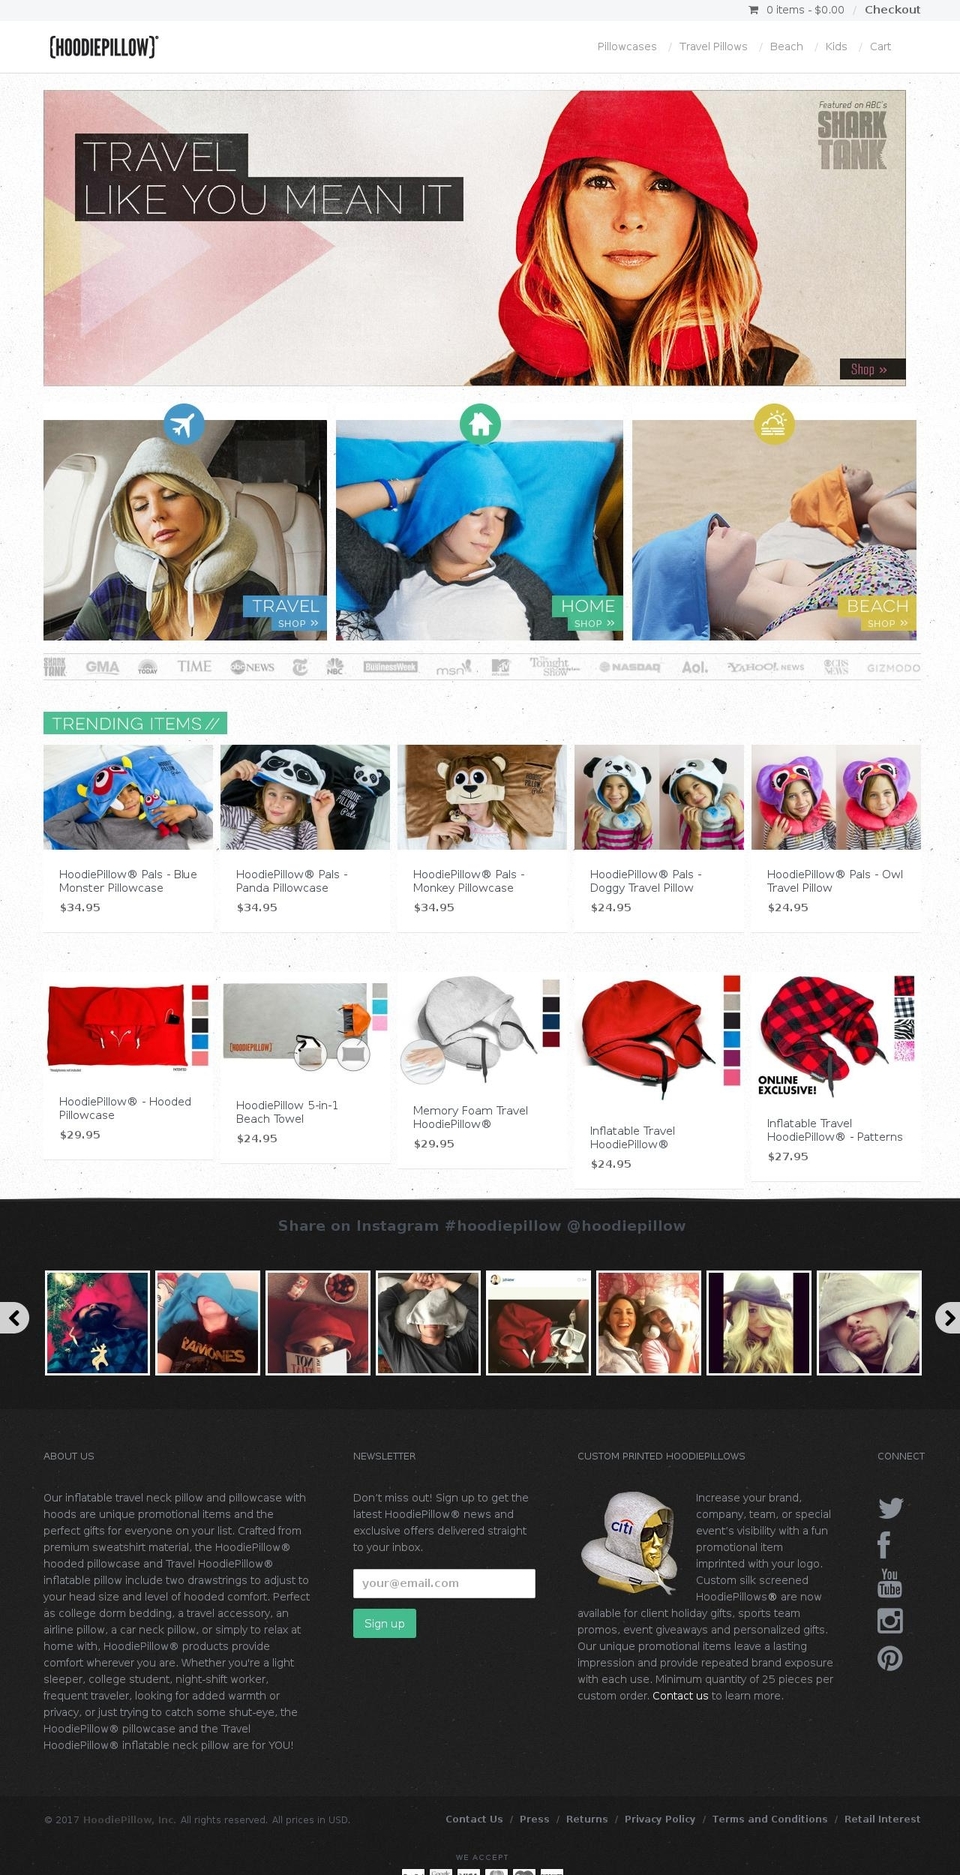 Copy of Providence Shopify theme site example gethoodypillow.com